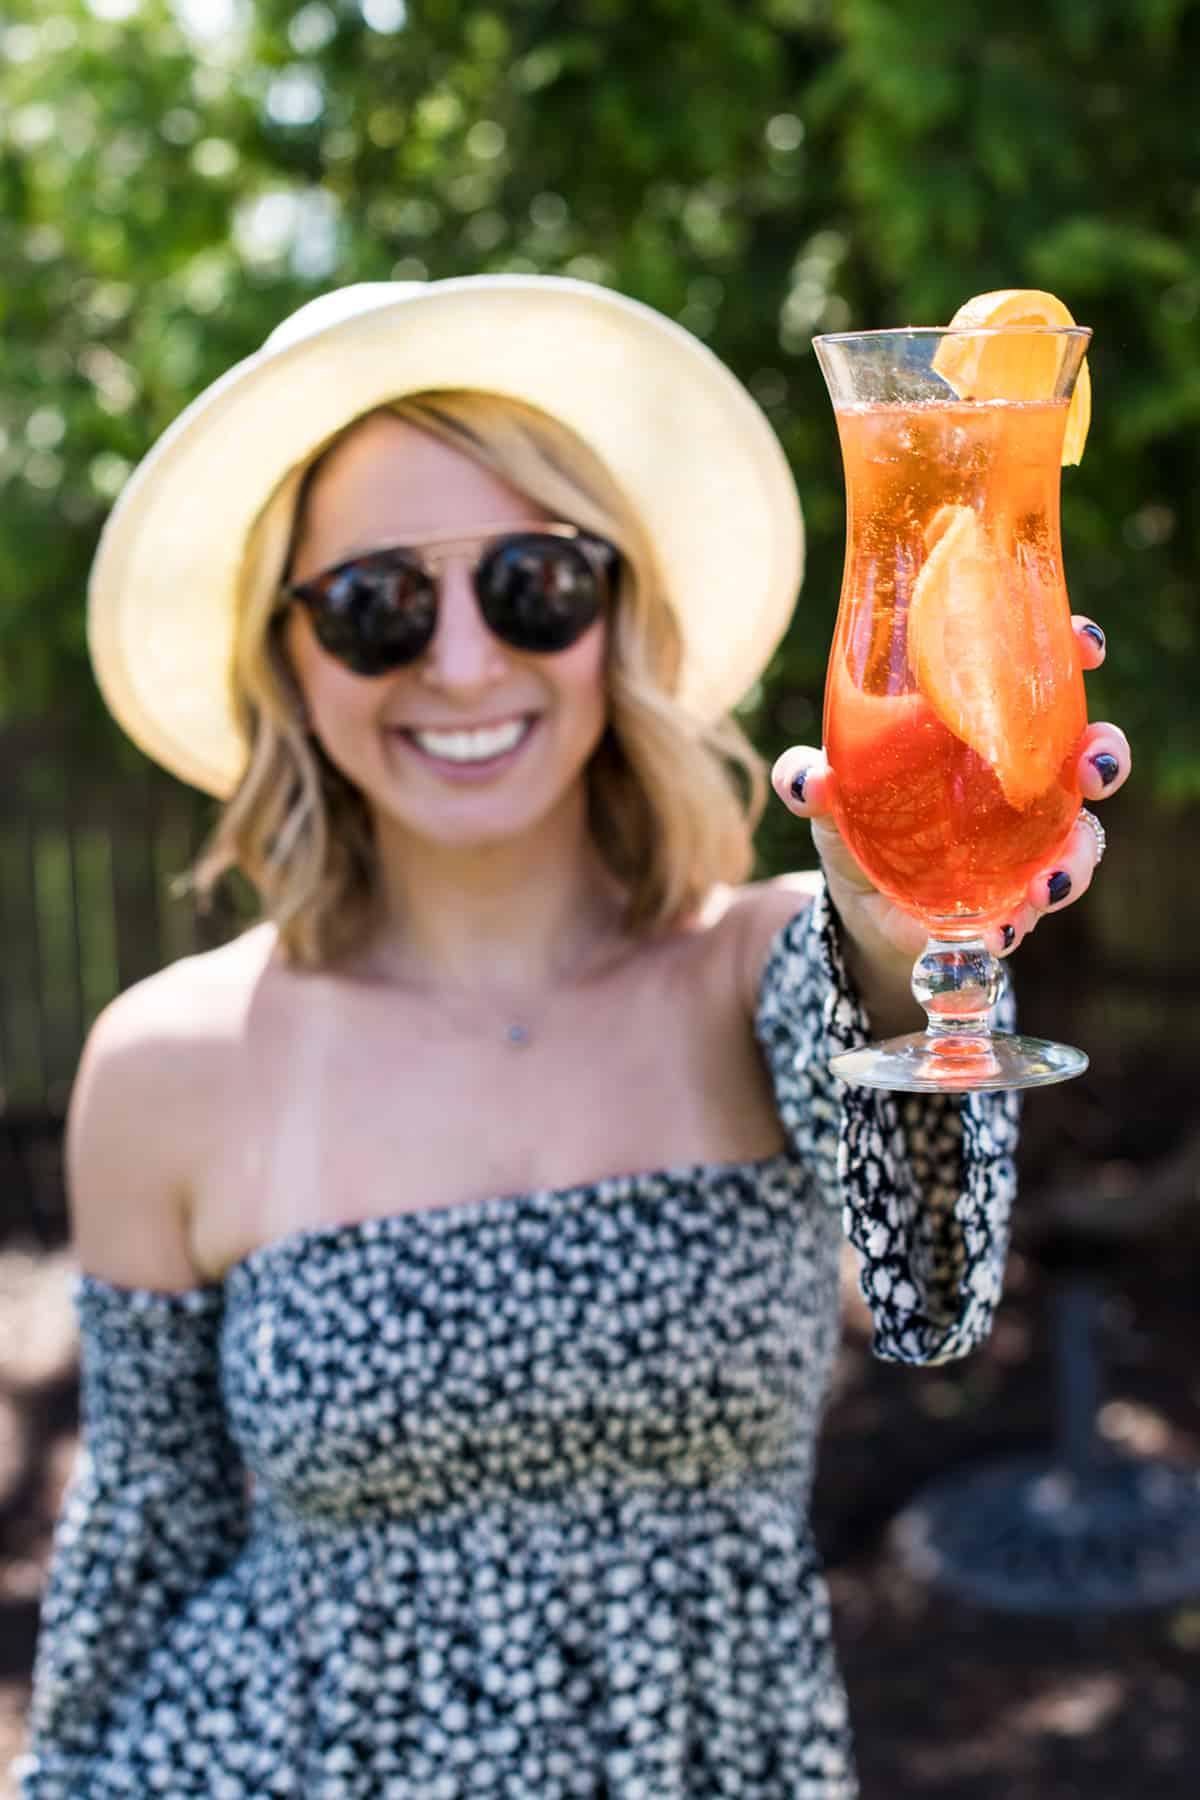 Full glass of aperol spritz cocktail